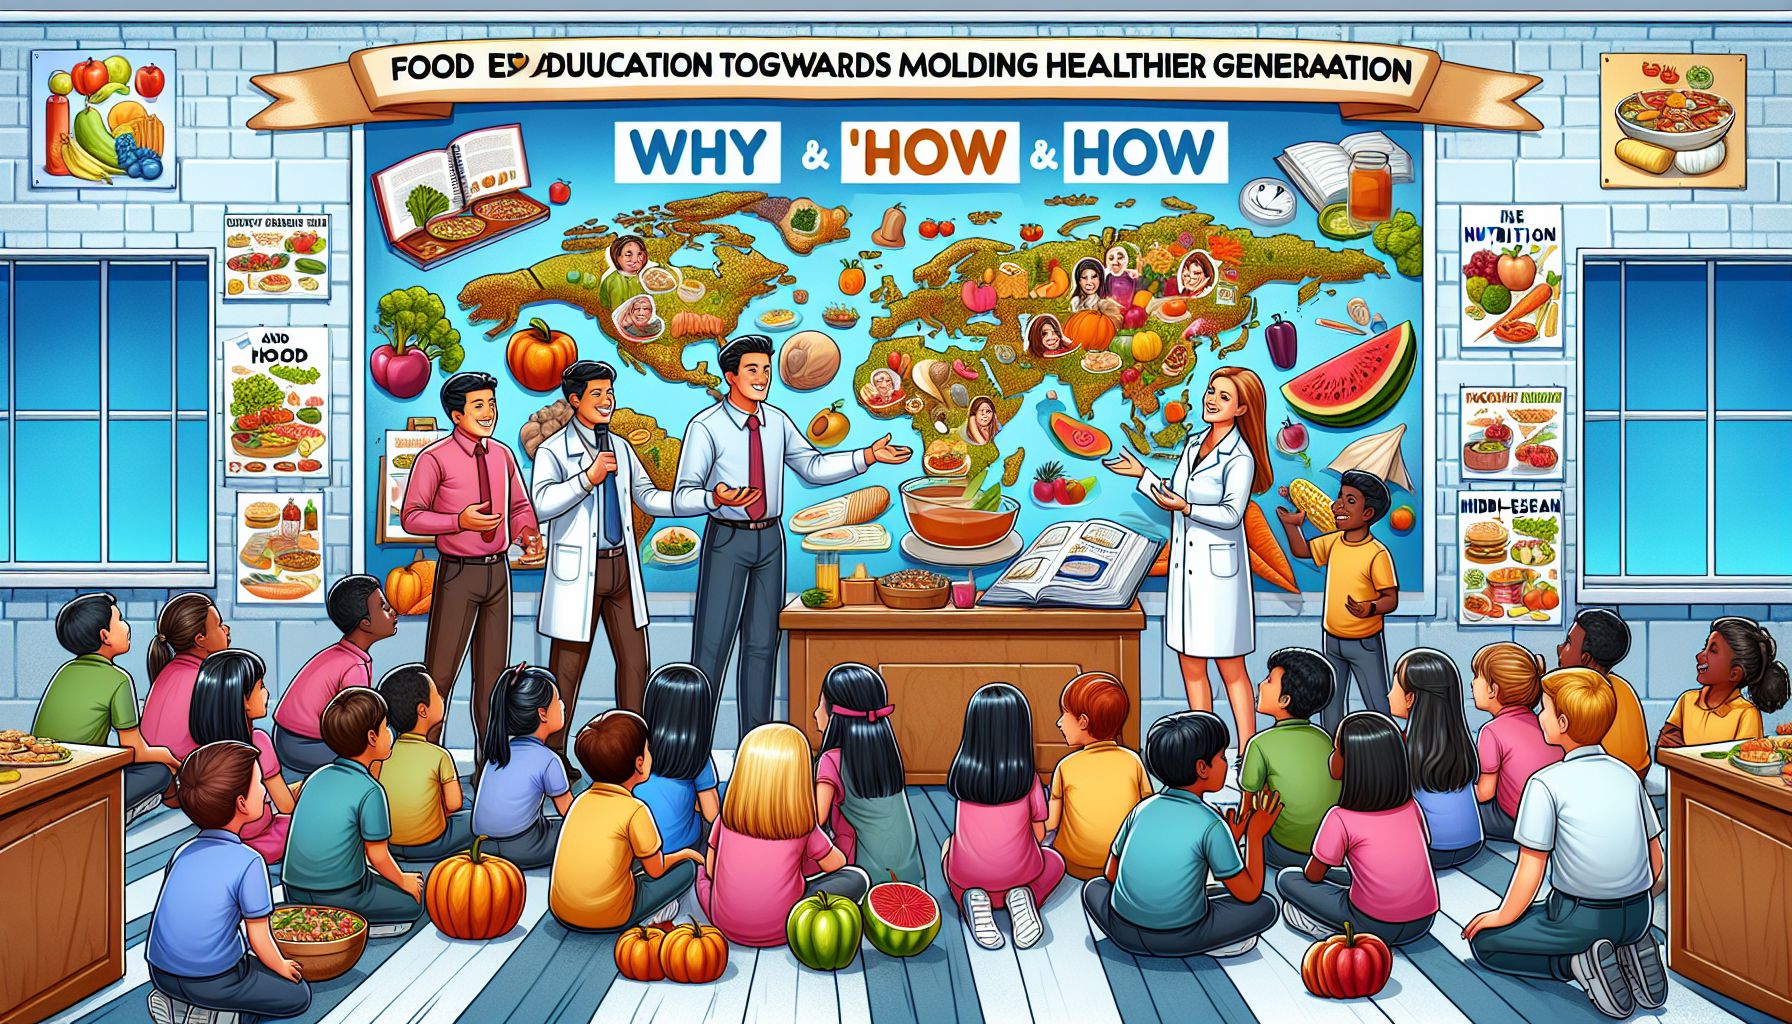 The “Why” and “How” of Food Education: Shaping Healthier Generations